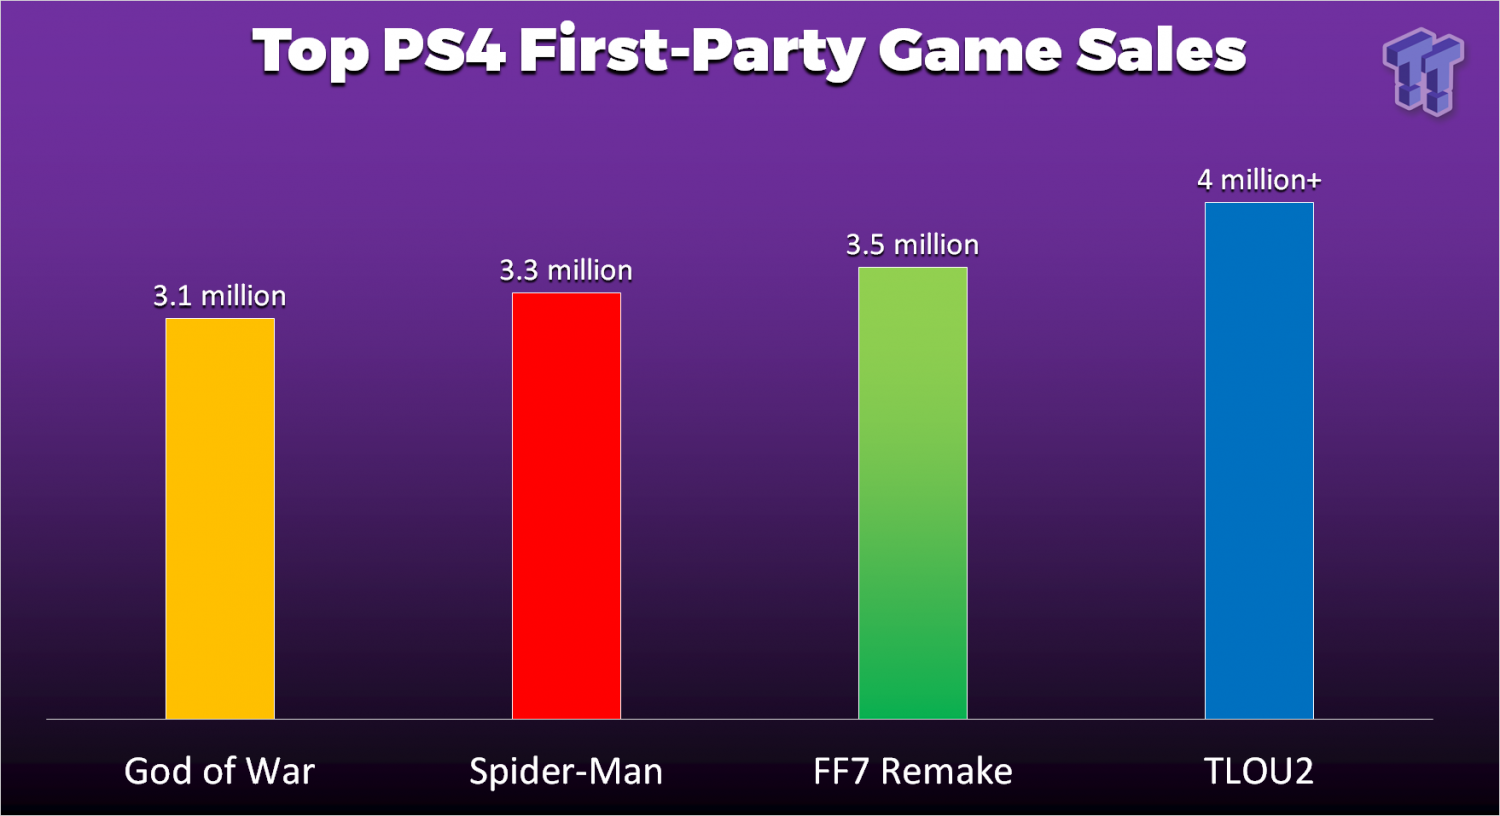 fastest selling ps4 game